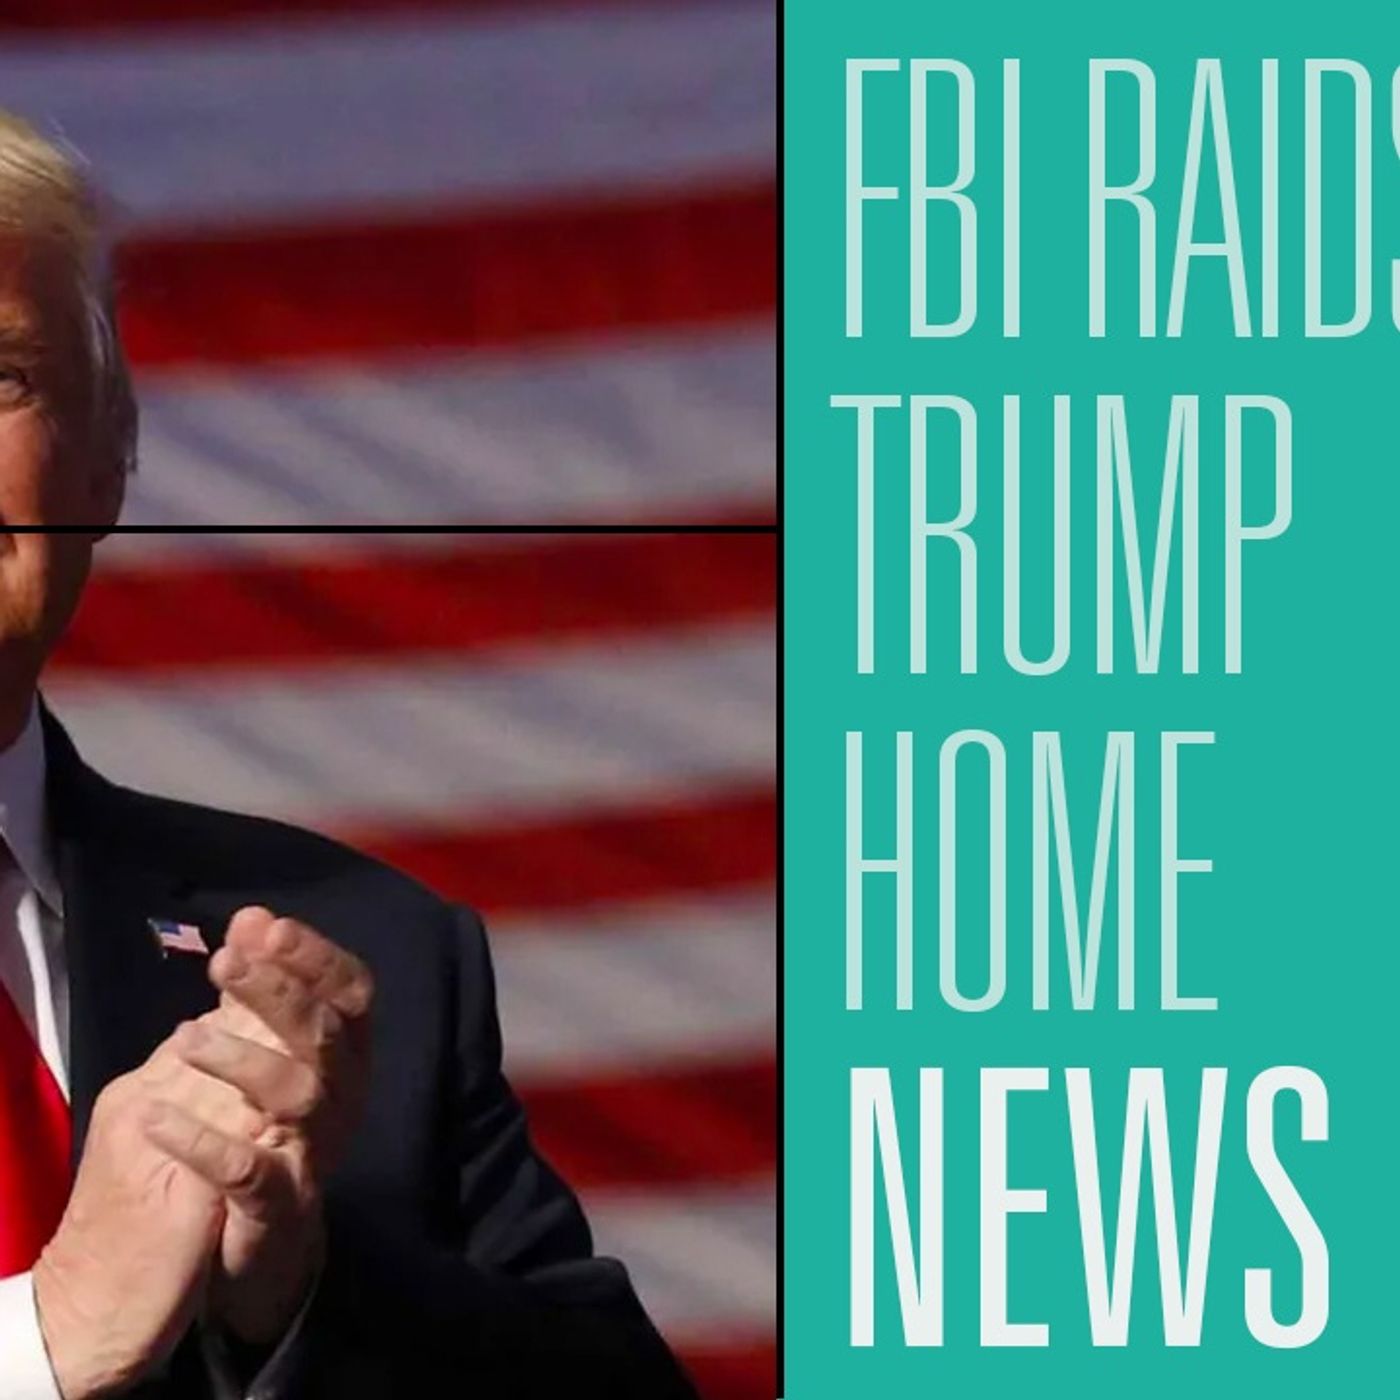 Trump's Home RAIDED By the FBI, Virginia To Protect Children from Sexual Education | HBR News 368